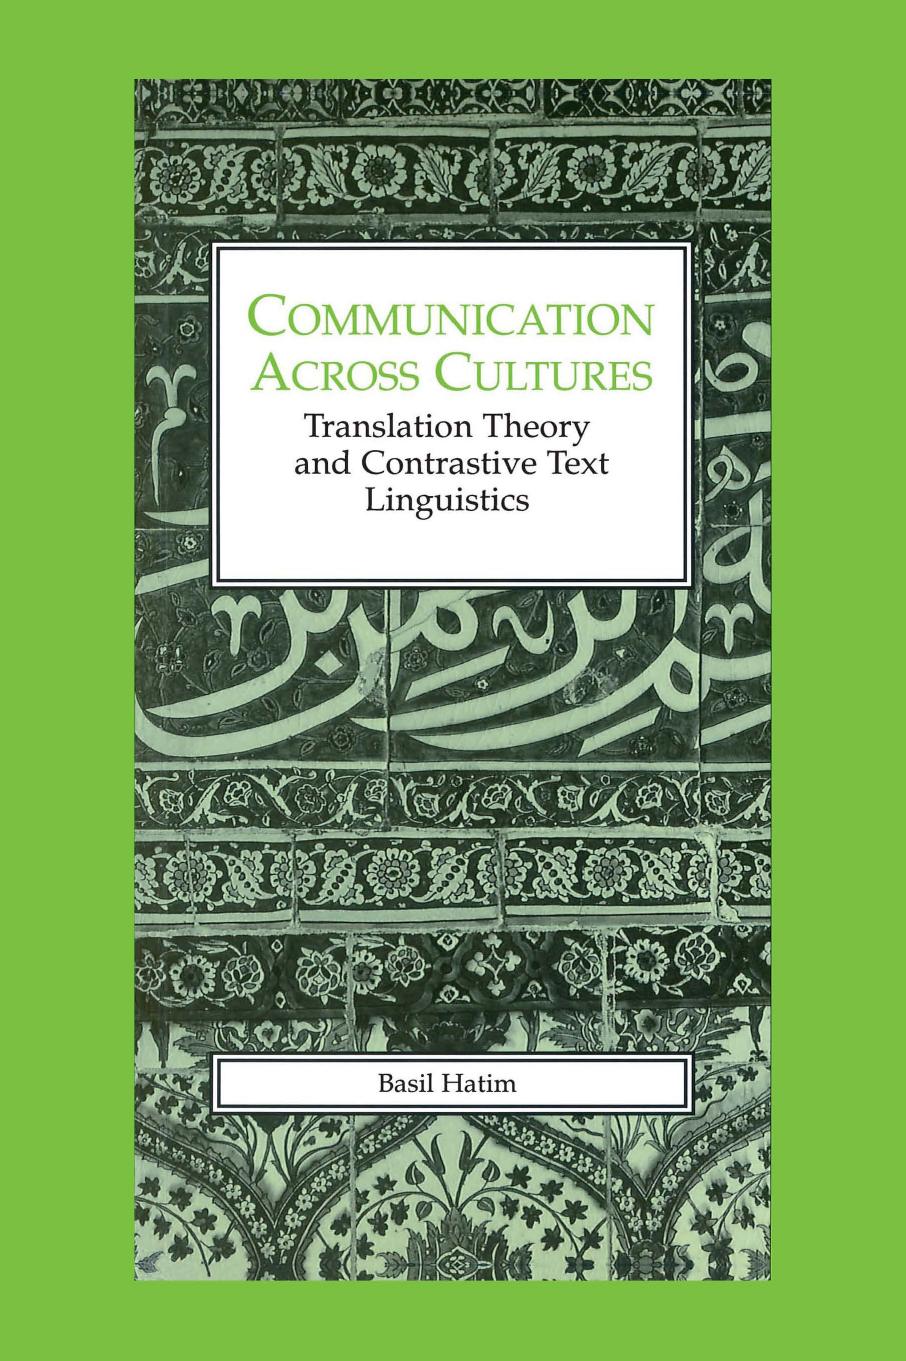 Communication Across Cultures: Translation Theory and Contrastive Text Linguistics